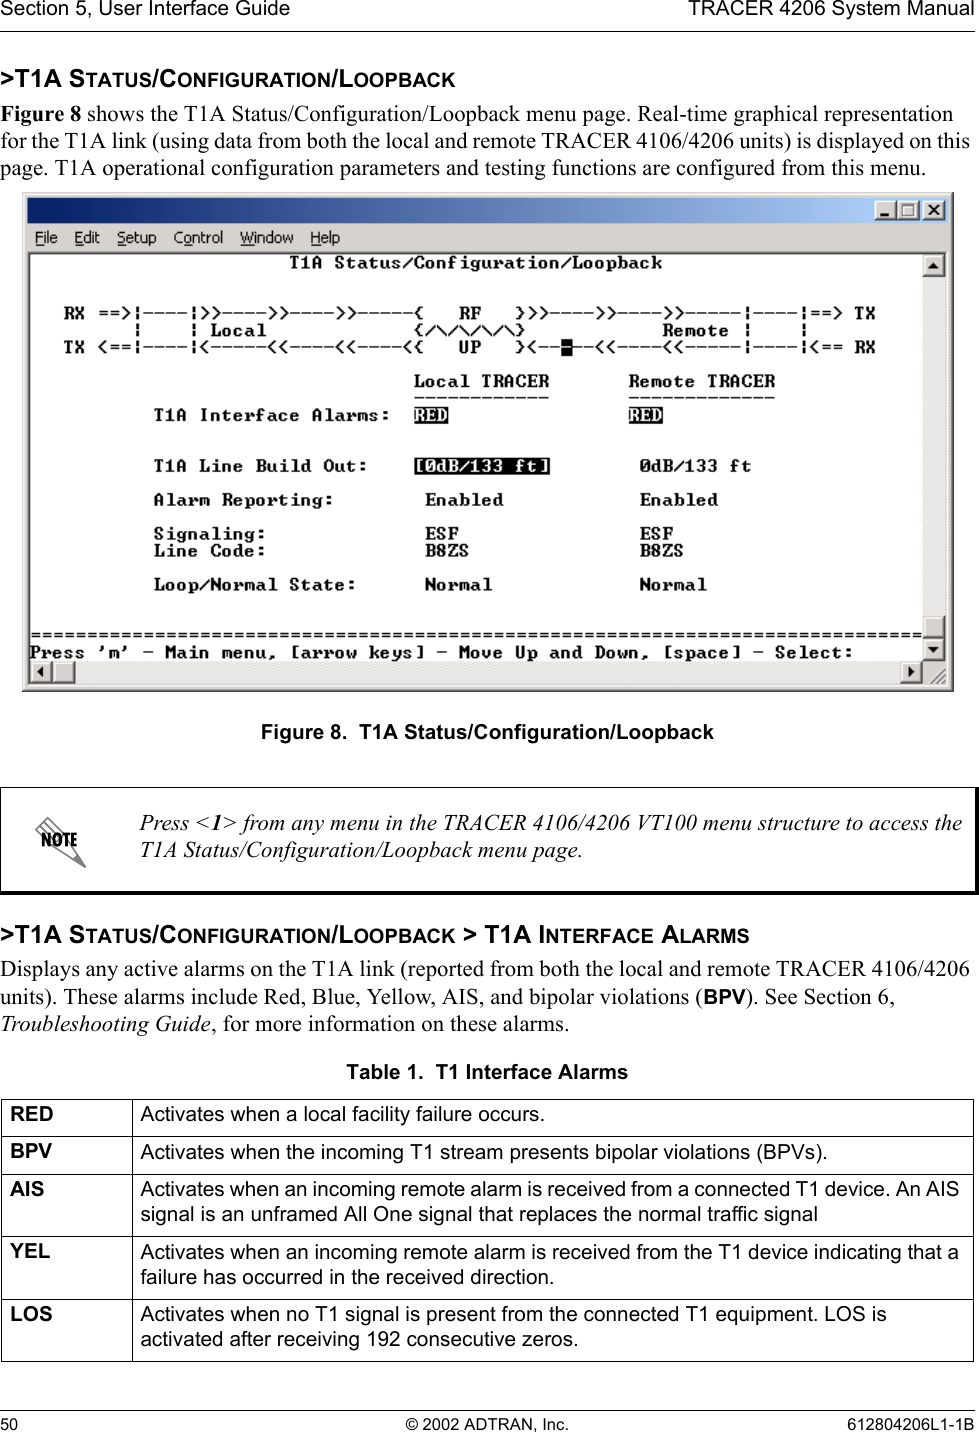 Section 5, User Interface Guide TRACER 4206 System Manual50 © 2002 ADTRAN, Inc. 612804206L1-1B&gt;T1A STATUS/CONFIGURATION/LOOPBACKFigure 8 shows the T1A Status/Configuration/Loopback menu page. Real-time graphical representation for the T1A link (using data from both the local and remote TRACER 4106/4206 units) is displayed on this page. T1A operational configuration parameters and testing functions are configured from this menu.Figure 8.  T1A Status/Configuration/Loopback&gt;T1A STATUS/CONFIGURATION/LOOPBACK &gt; T1A INTERFACE ALARMSDisplays any active alarms on the T1A link (reported from both the local and remote TRACER 4106/4206 units). These alarms include Red, Blue, Yellow, AIS, and bipolar violations (BPV). See Section 6, Troubleshooting Guide, for more information on these alarms.Press &lt;1&gt; from any menu in the TRACER 4106/4206 VT100 menu structure to access the T1A Status/Configuration/Loopback menu page.Table 1.  T1 Interface AlarmsRED Activates when a local facility failure occurs.BPV Activates when the incoming T1 stream presents bipolar violations (BPVs).AIS Activates when an incoming remote alarm is received from a connected T1 device. An AIS signal is an unframed All One signal that replaces the normal traffic signalYEL Activates when an incoming remote alarm is received from the T1 device indicating that a failure has occurred in the received direction.LOS Activates when no T1 signal is present from the connected T1 equipment. LOS is activated after receiving 192 consecutive zeros.